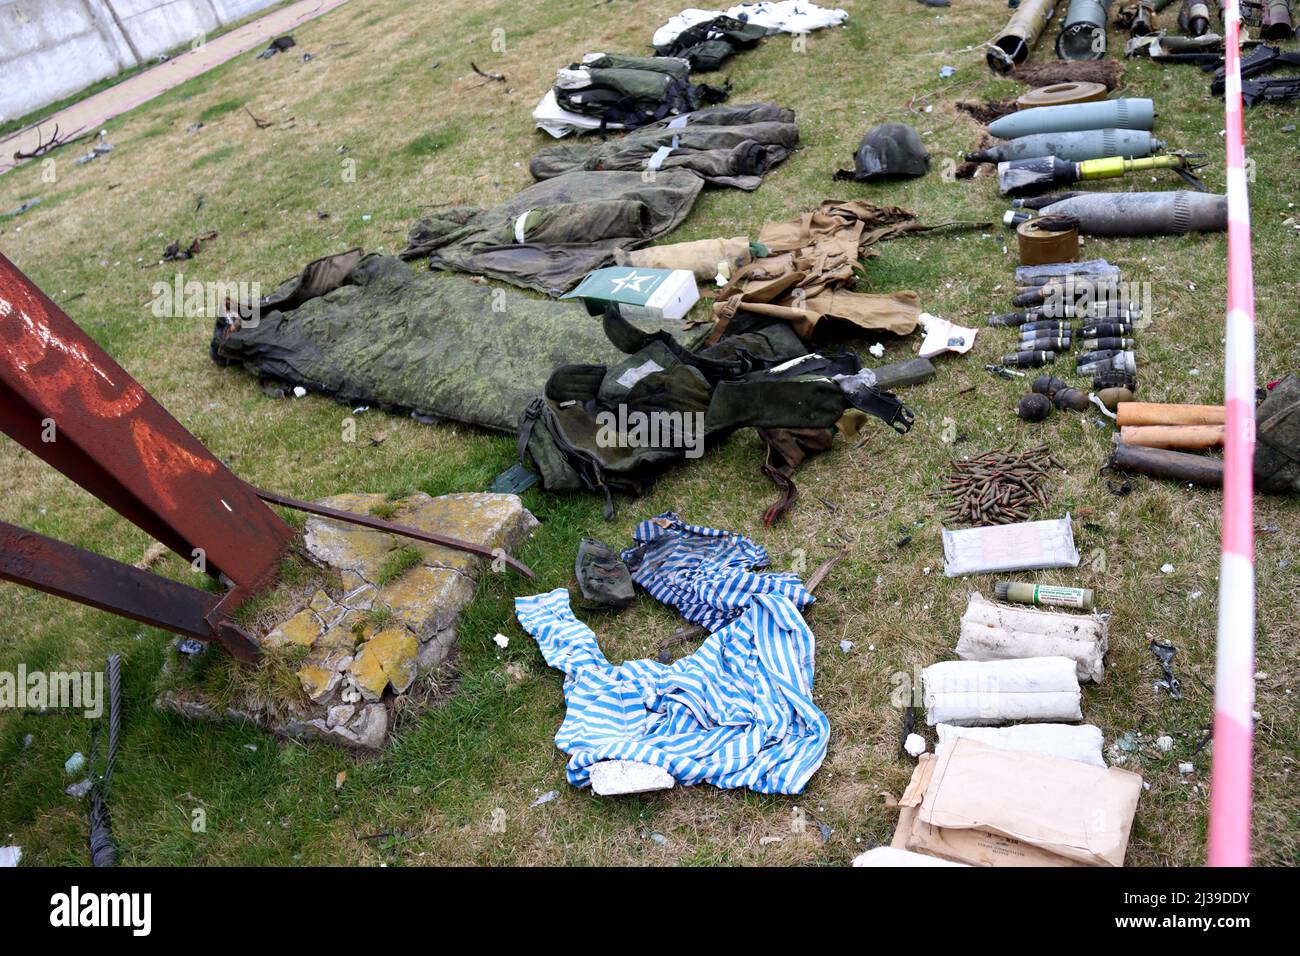 BUCHA, UKRAINE - APRIL 5, 2022 - Clothes and ammunition of Russian invaders are arranged on the ground in liberated Bucha, Kyiv Region, northern Ukrai Stock Photo